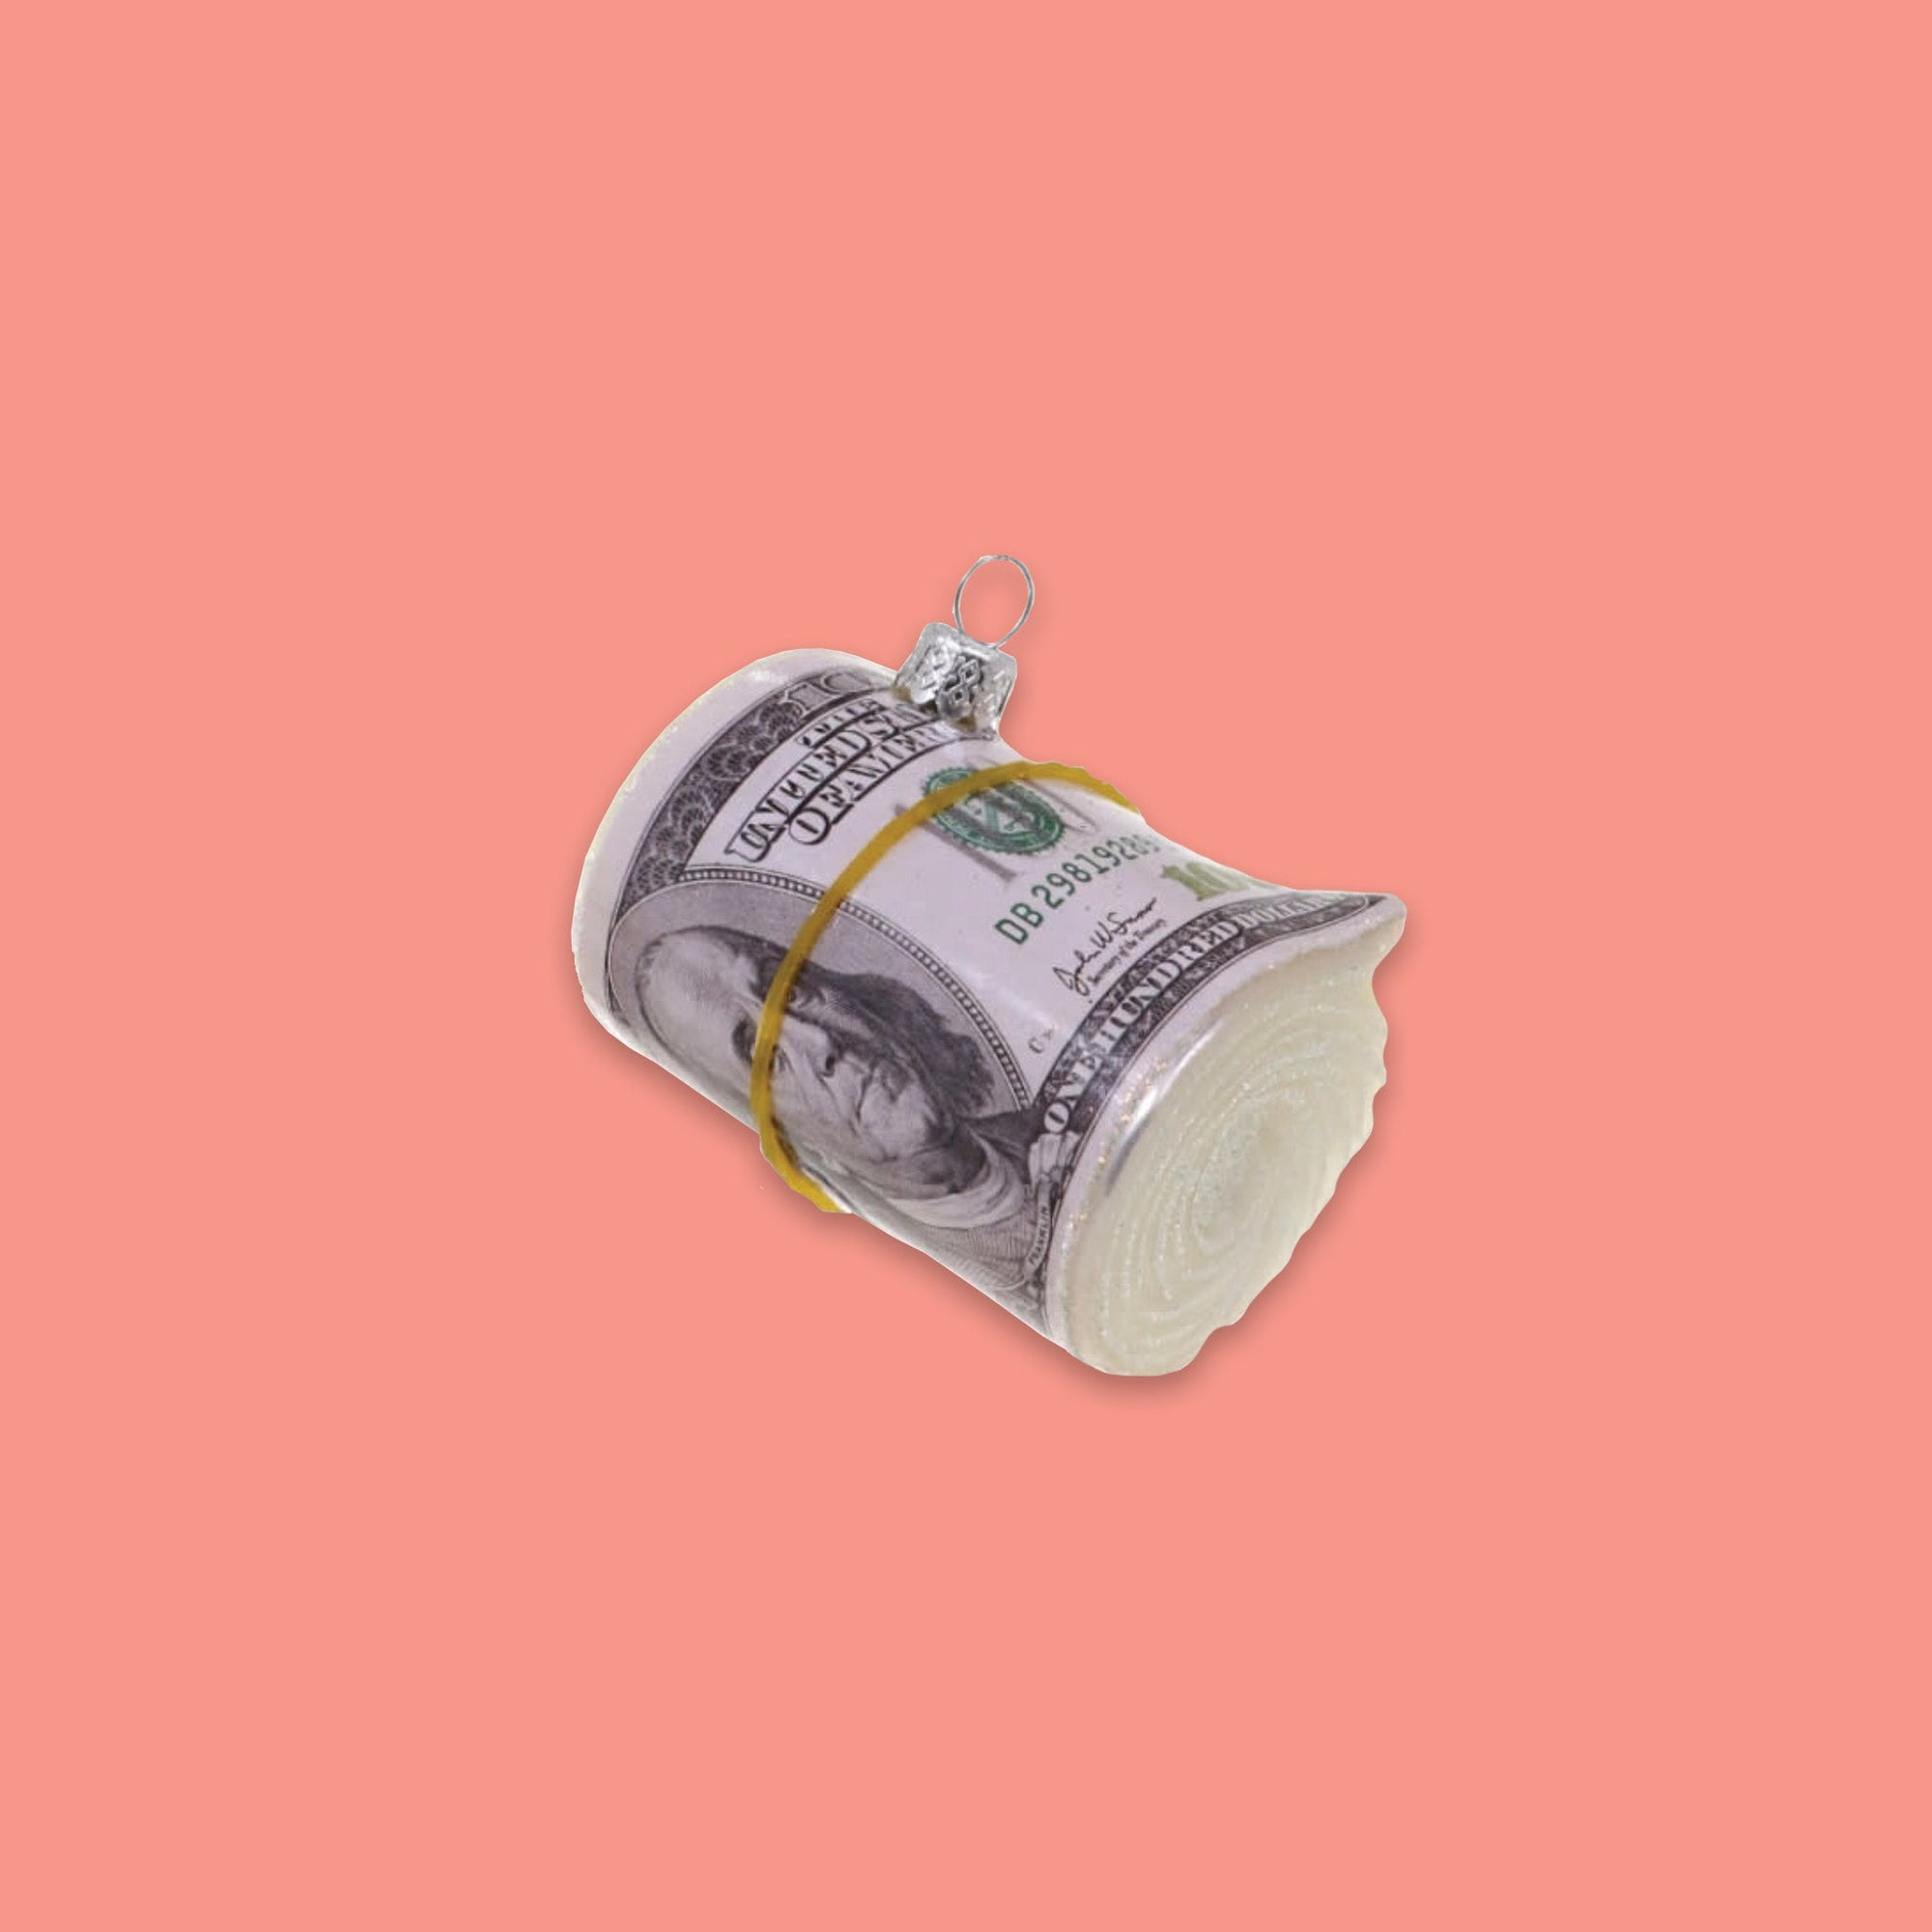 On a coral pink background sits a glass ornament of a roll of cash held by a rubberband.